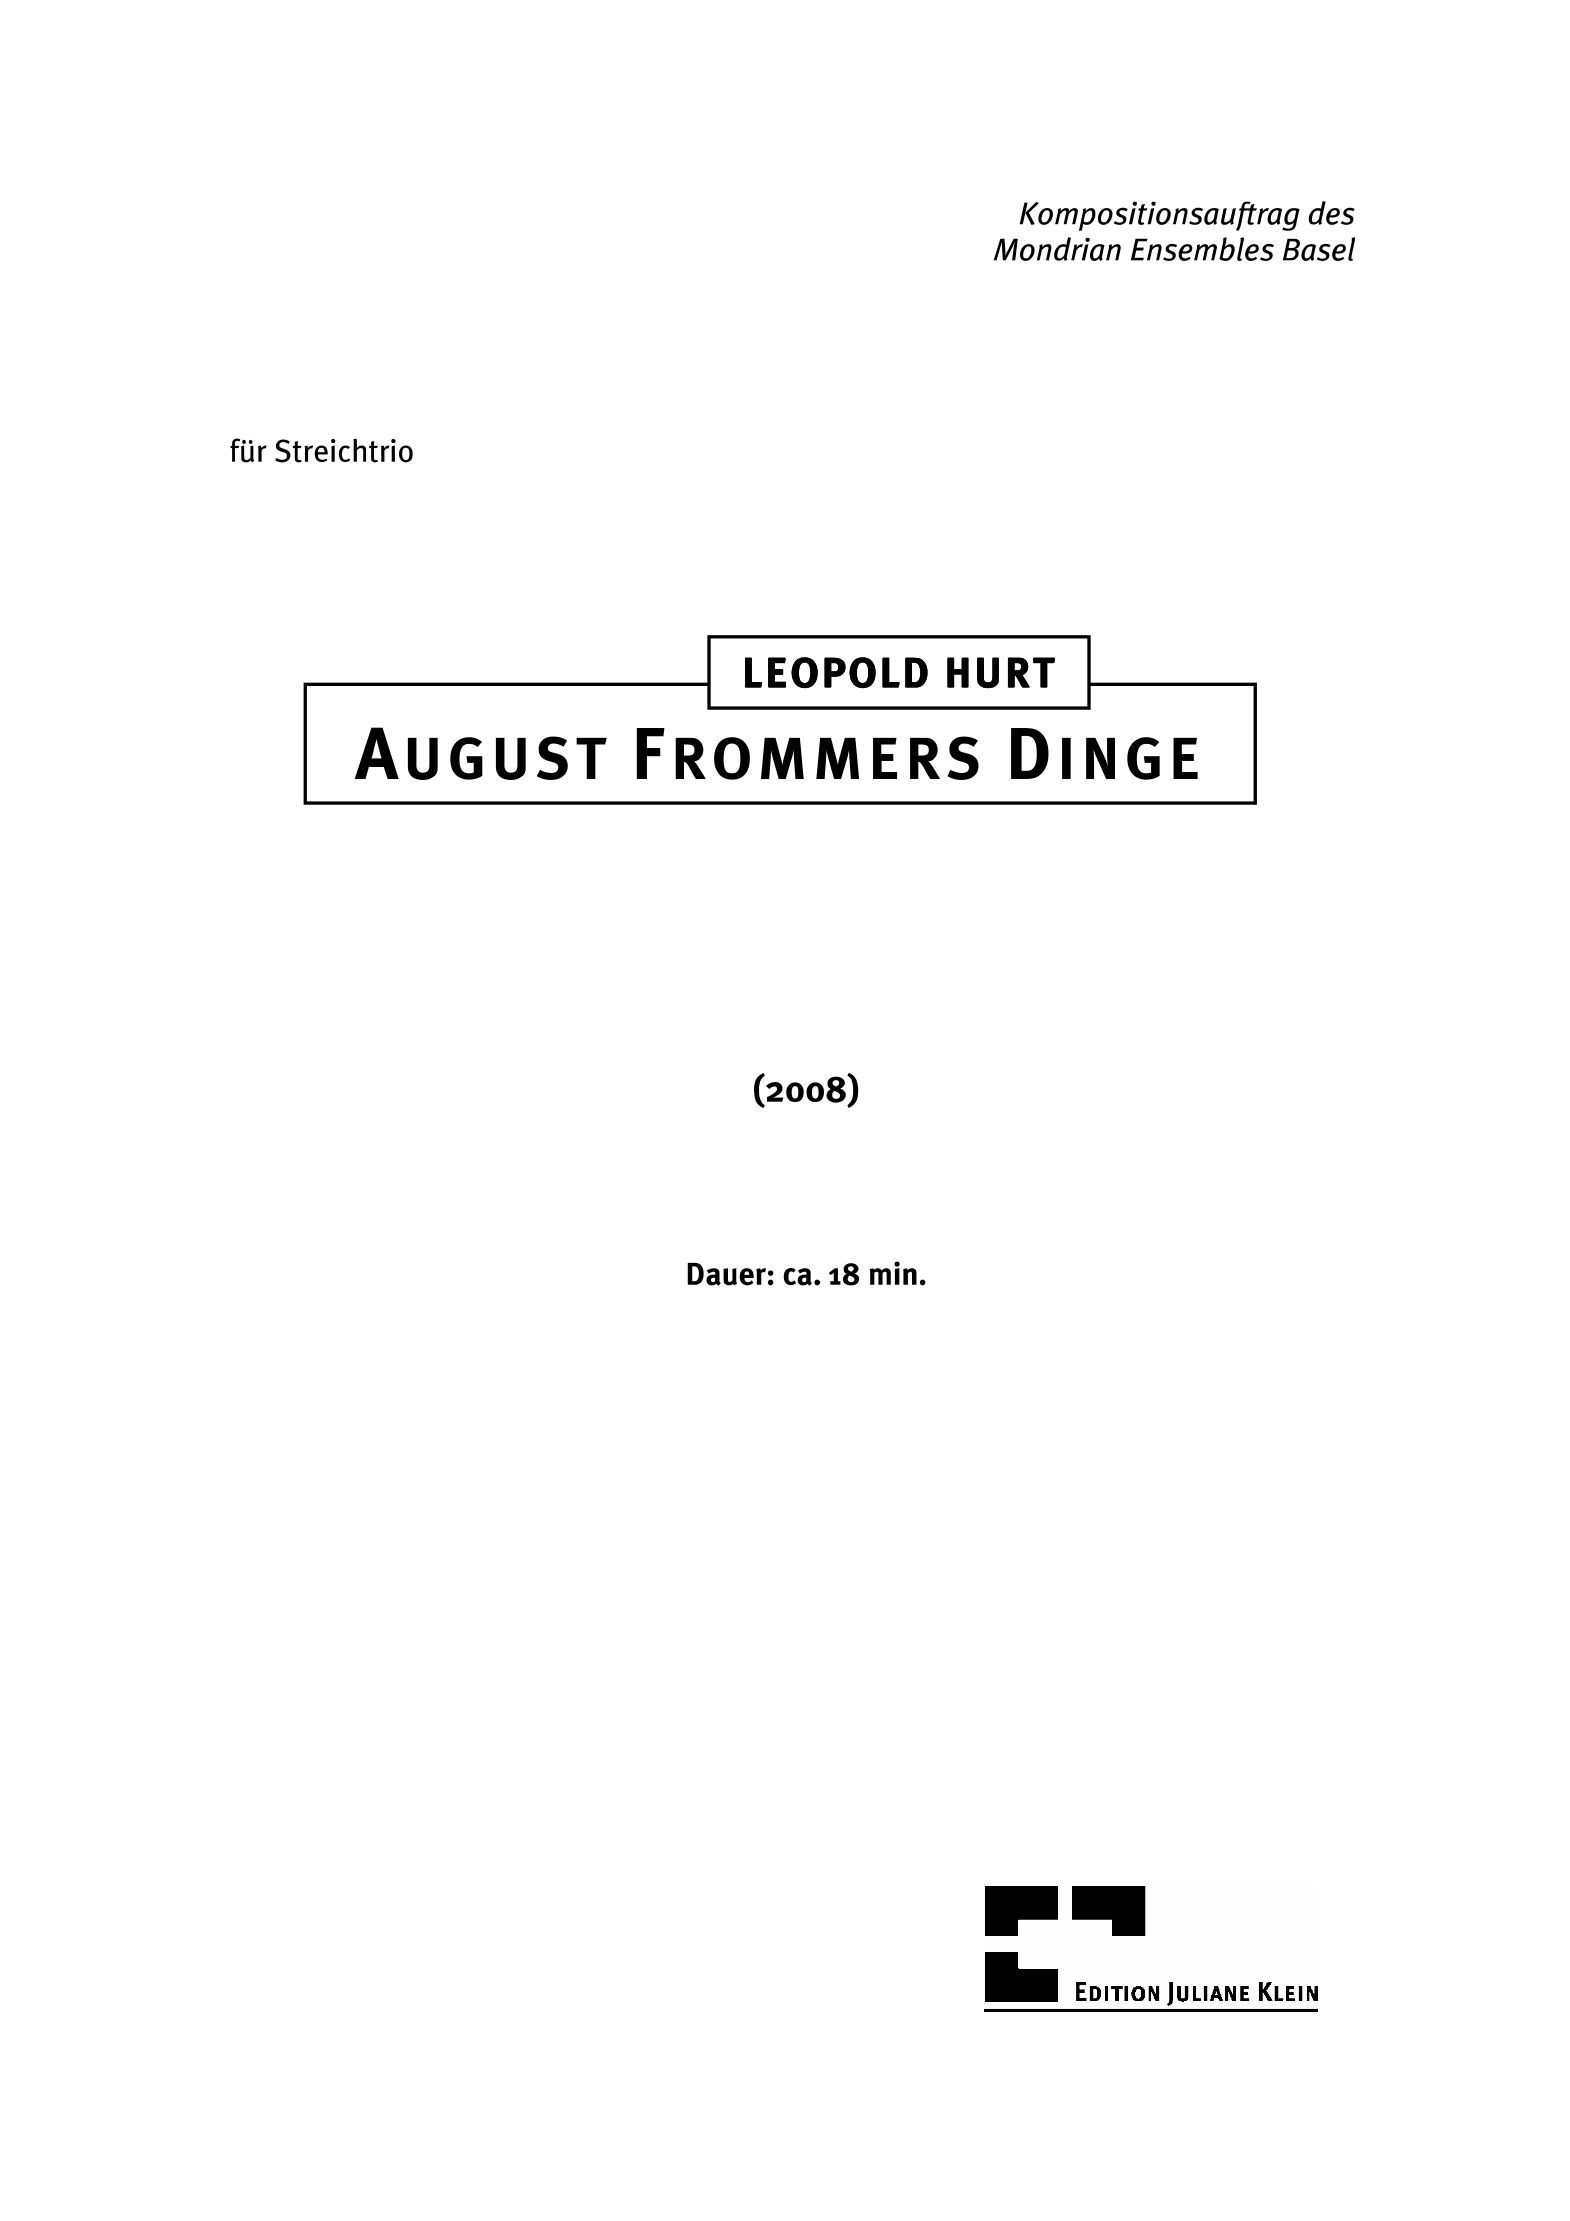 hurt_august frommers dinge z